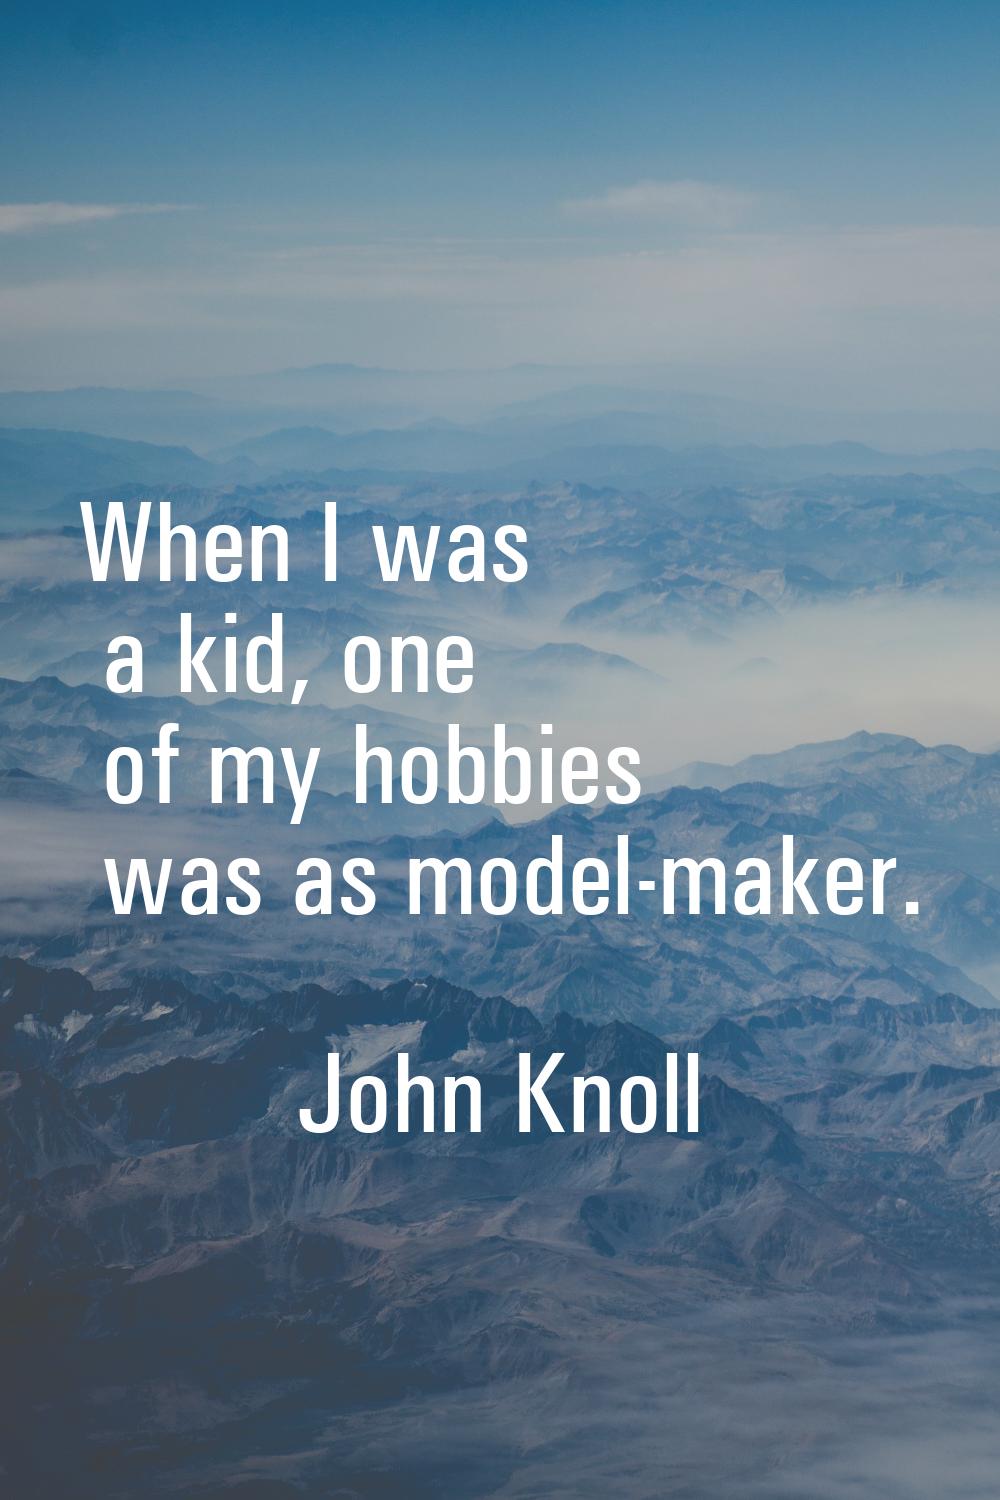 When I was a kid, one of my hobbies was as model-maker.